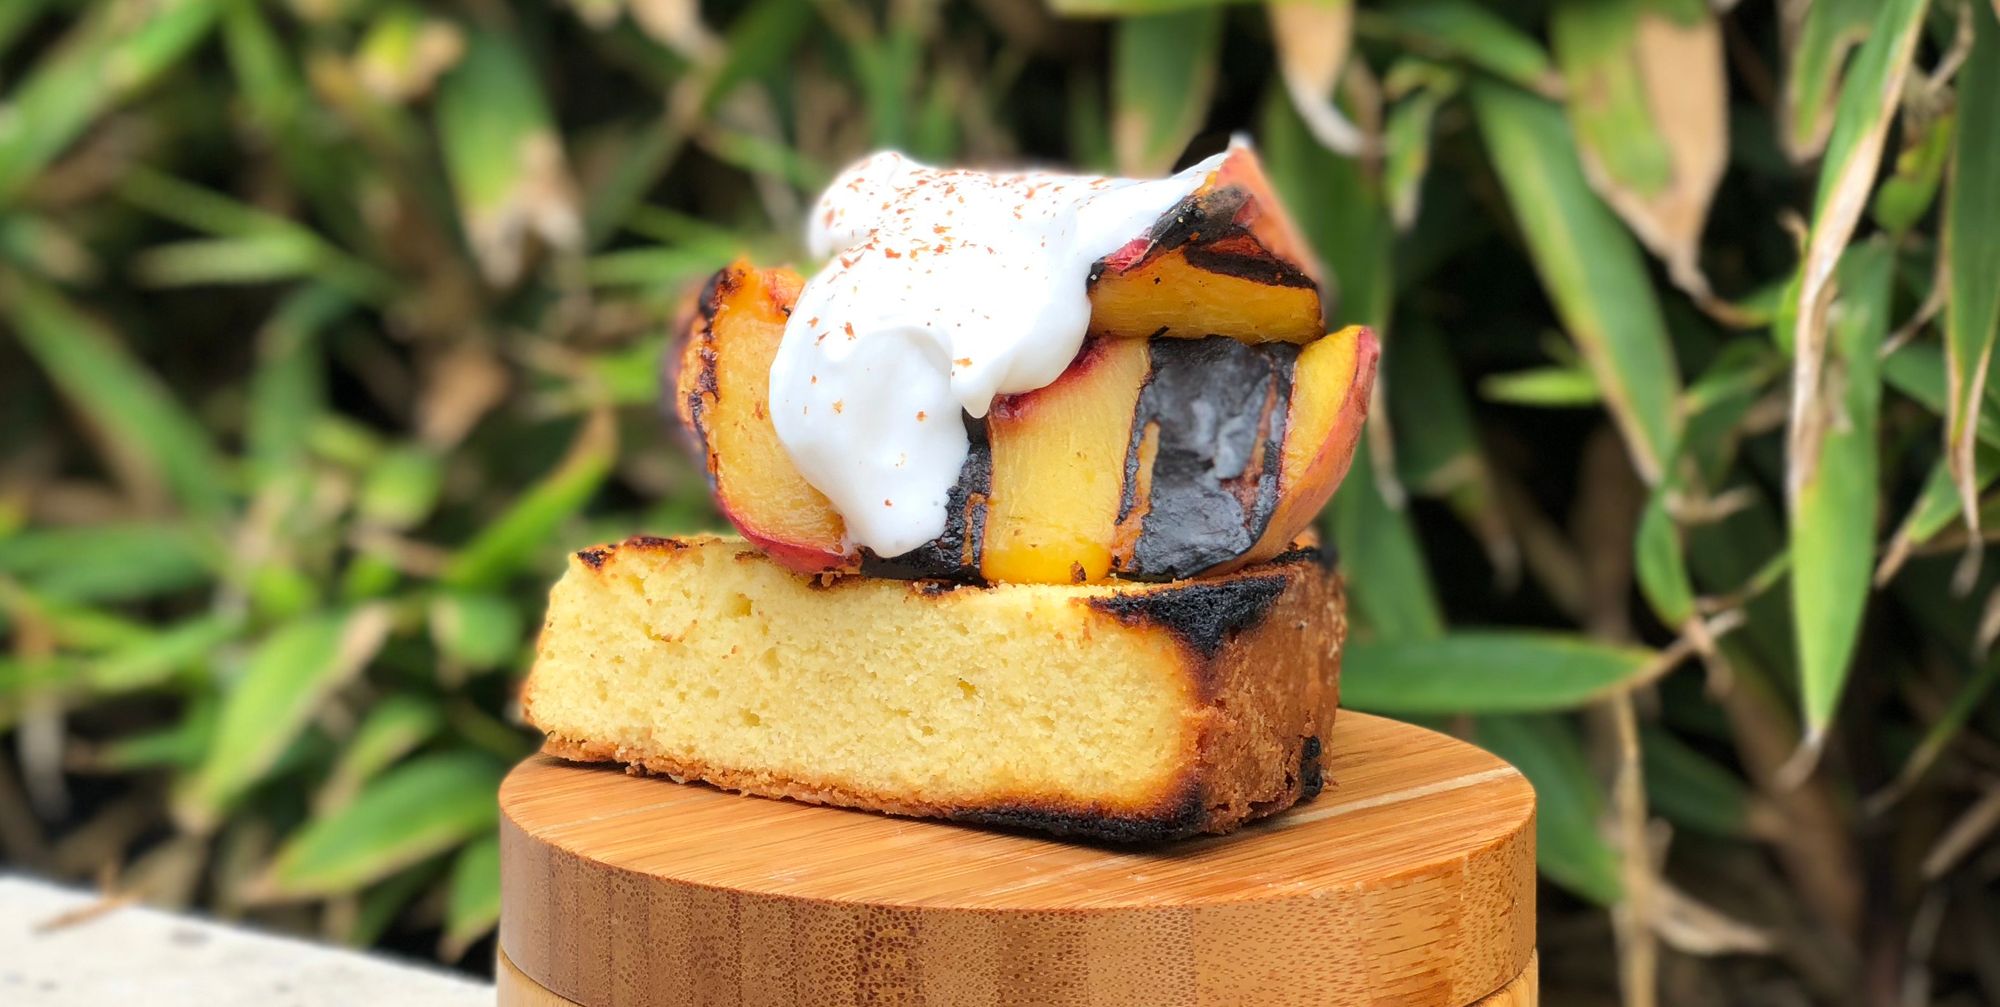 You should grill desserts more. Here's an example of why.